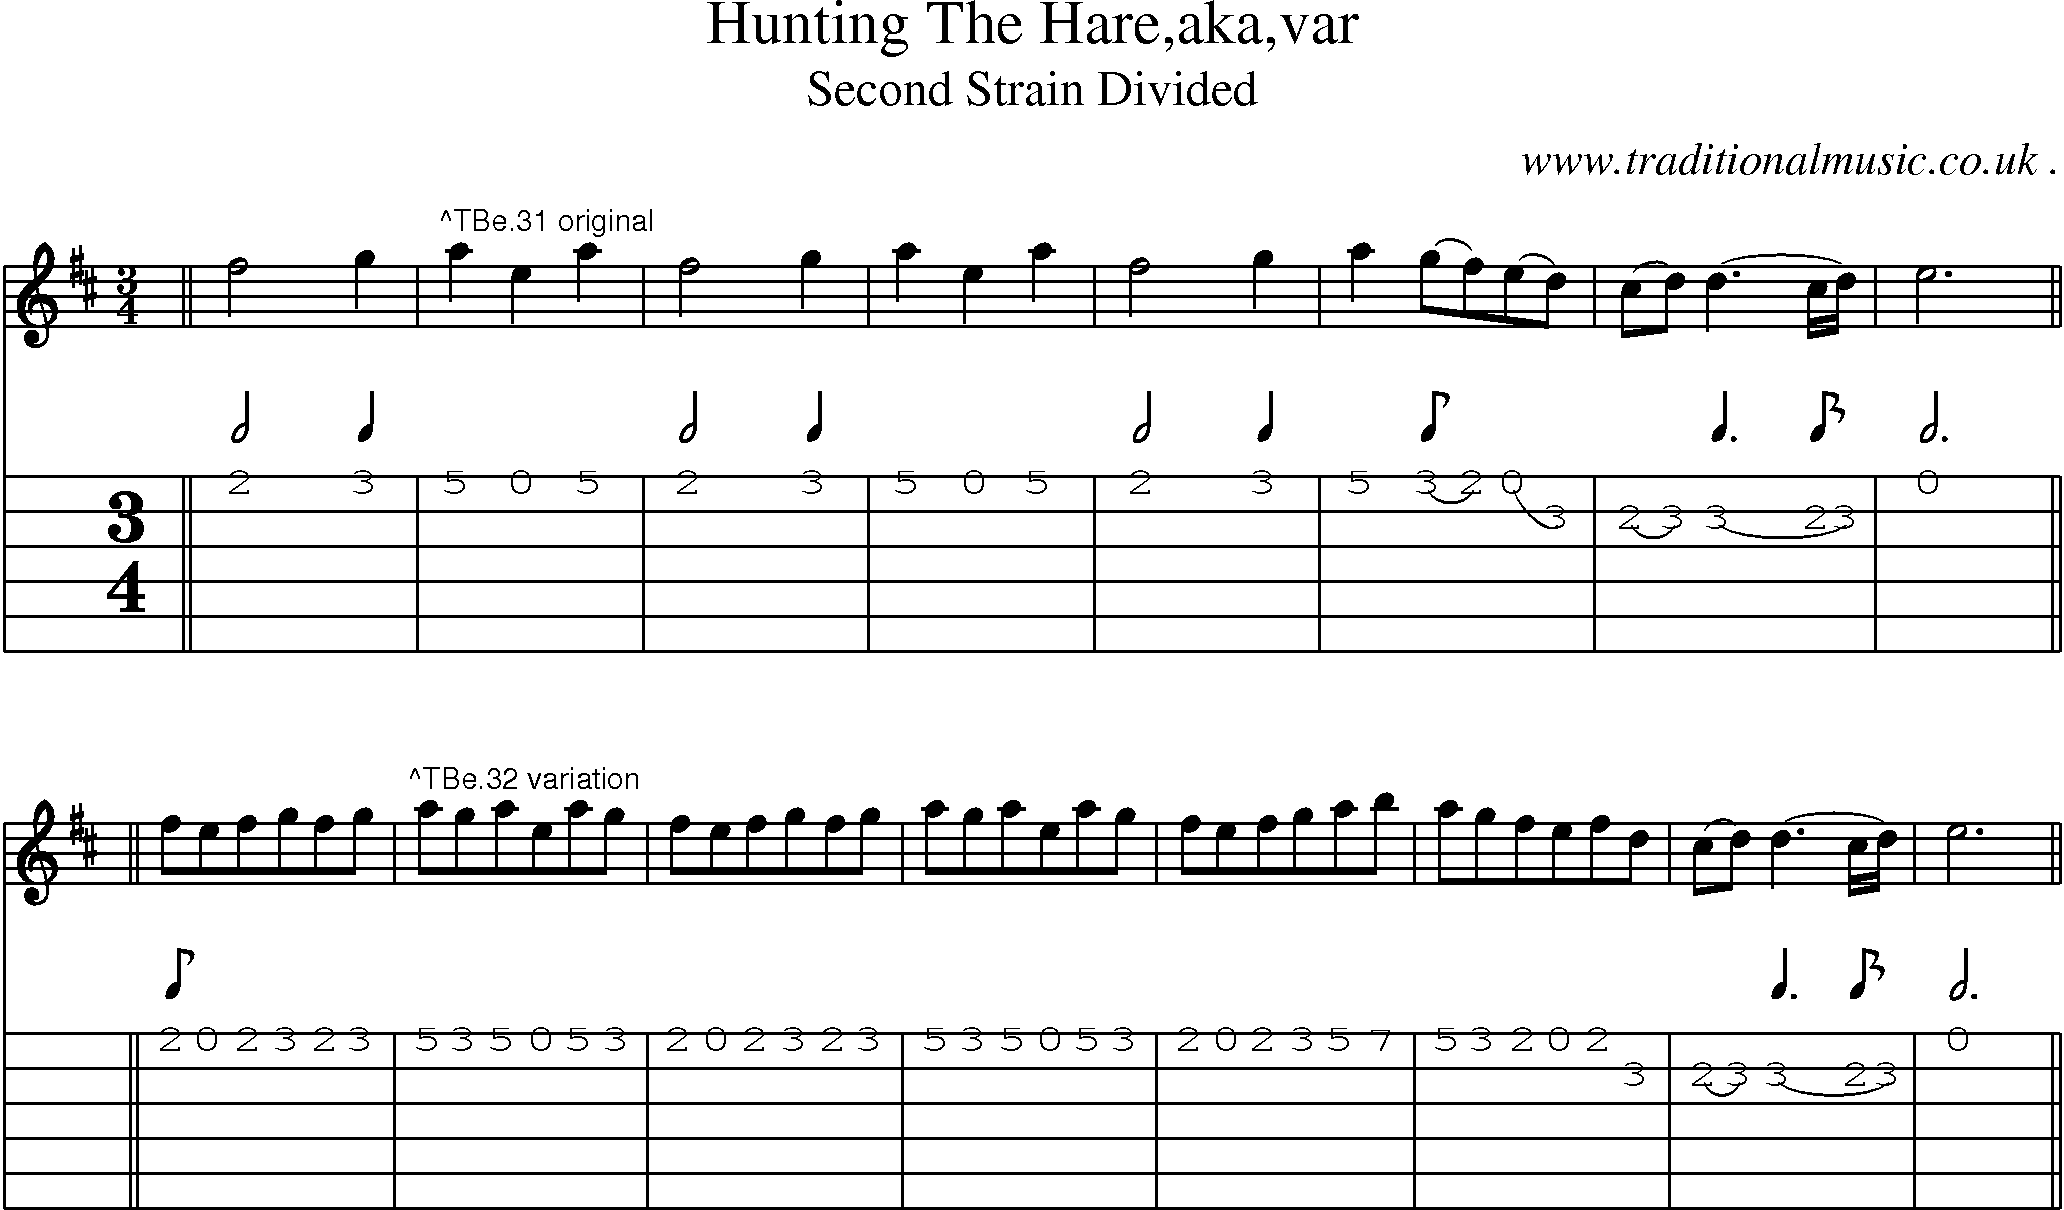 Sheet-Music and Guitar Tabs for Hunting The Hareakavar